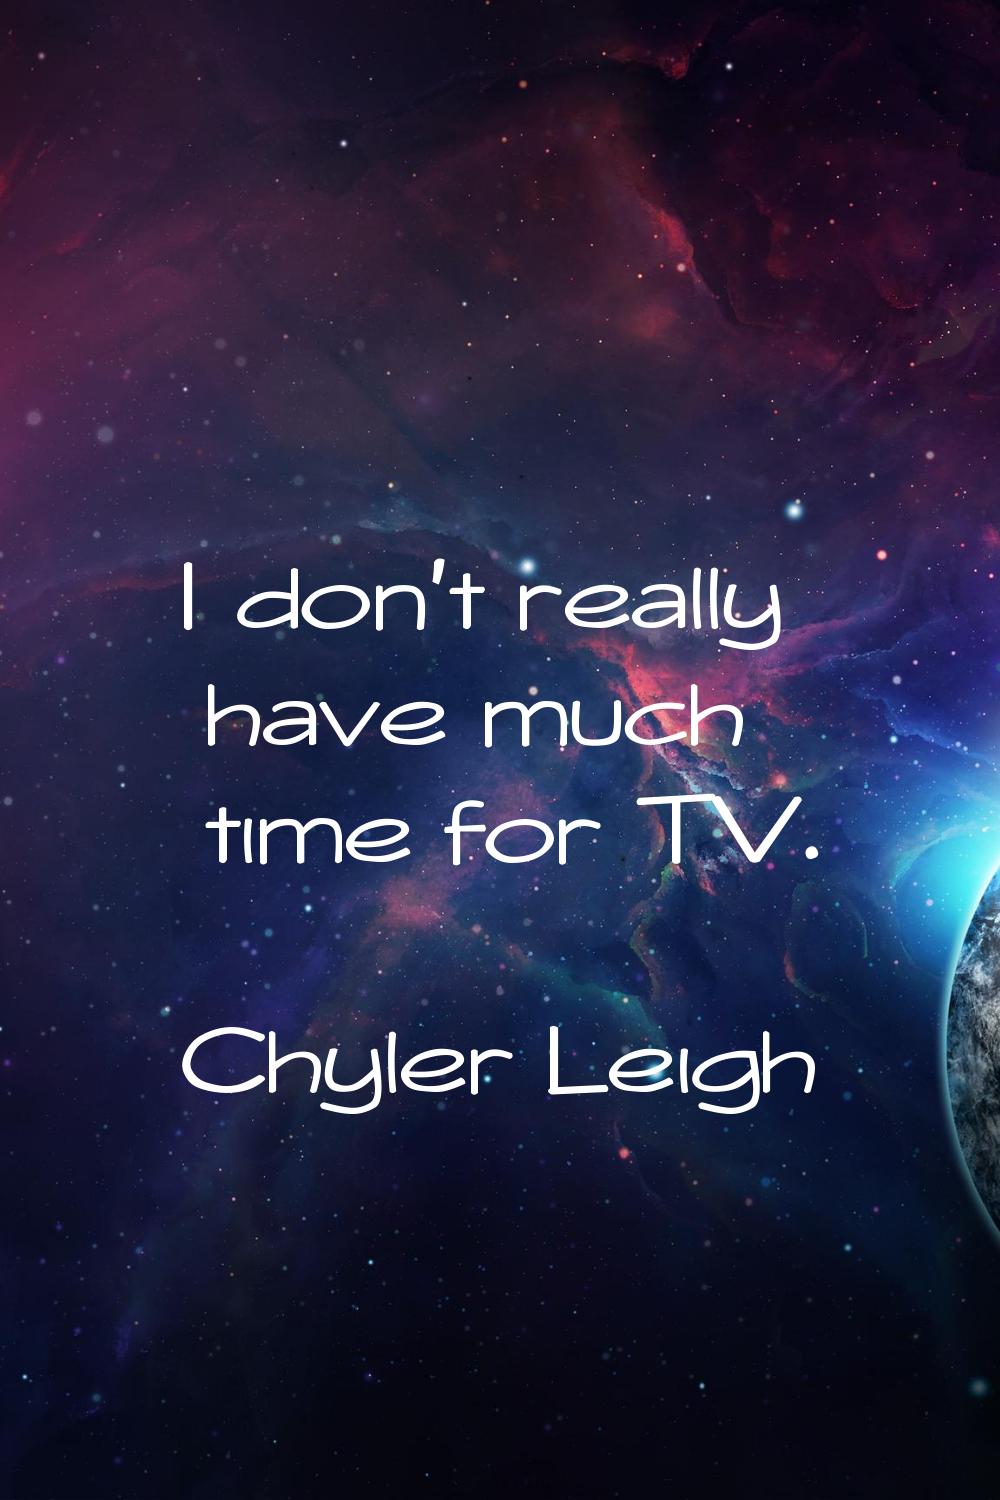 I don't really have much time for TV.